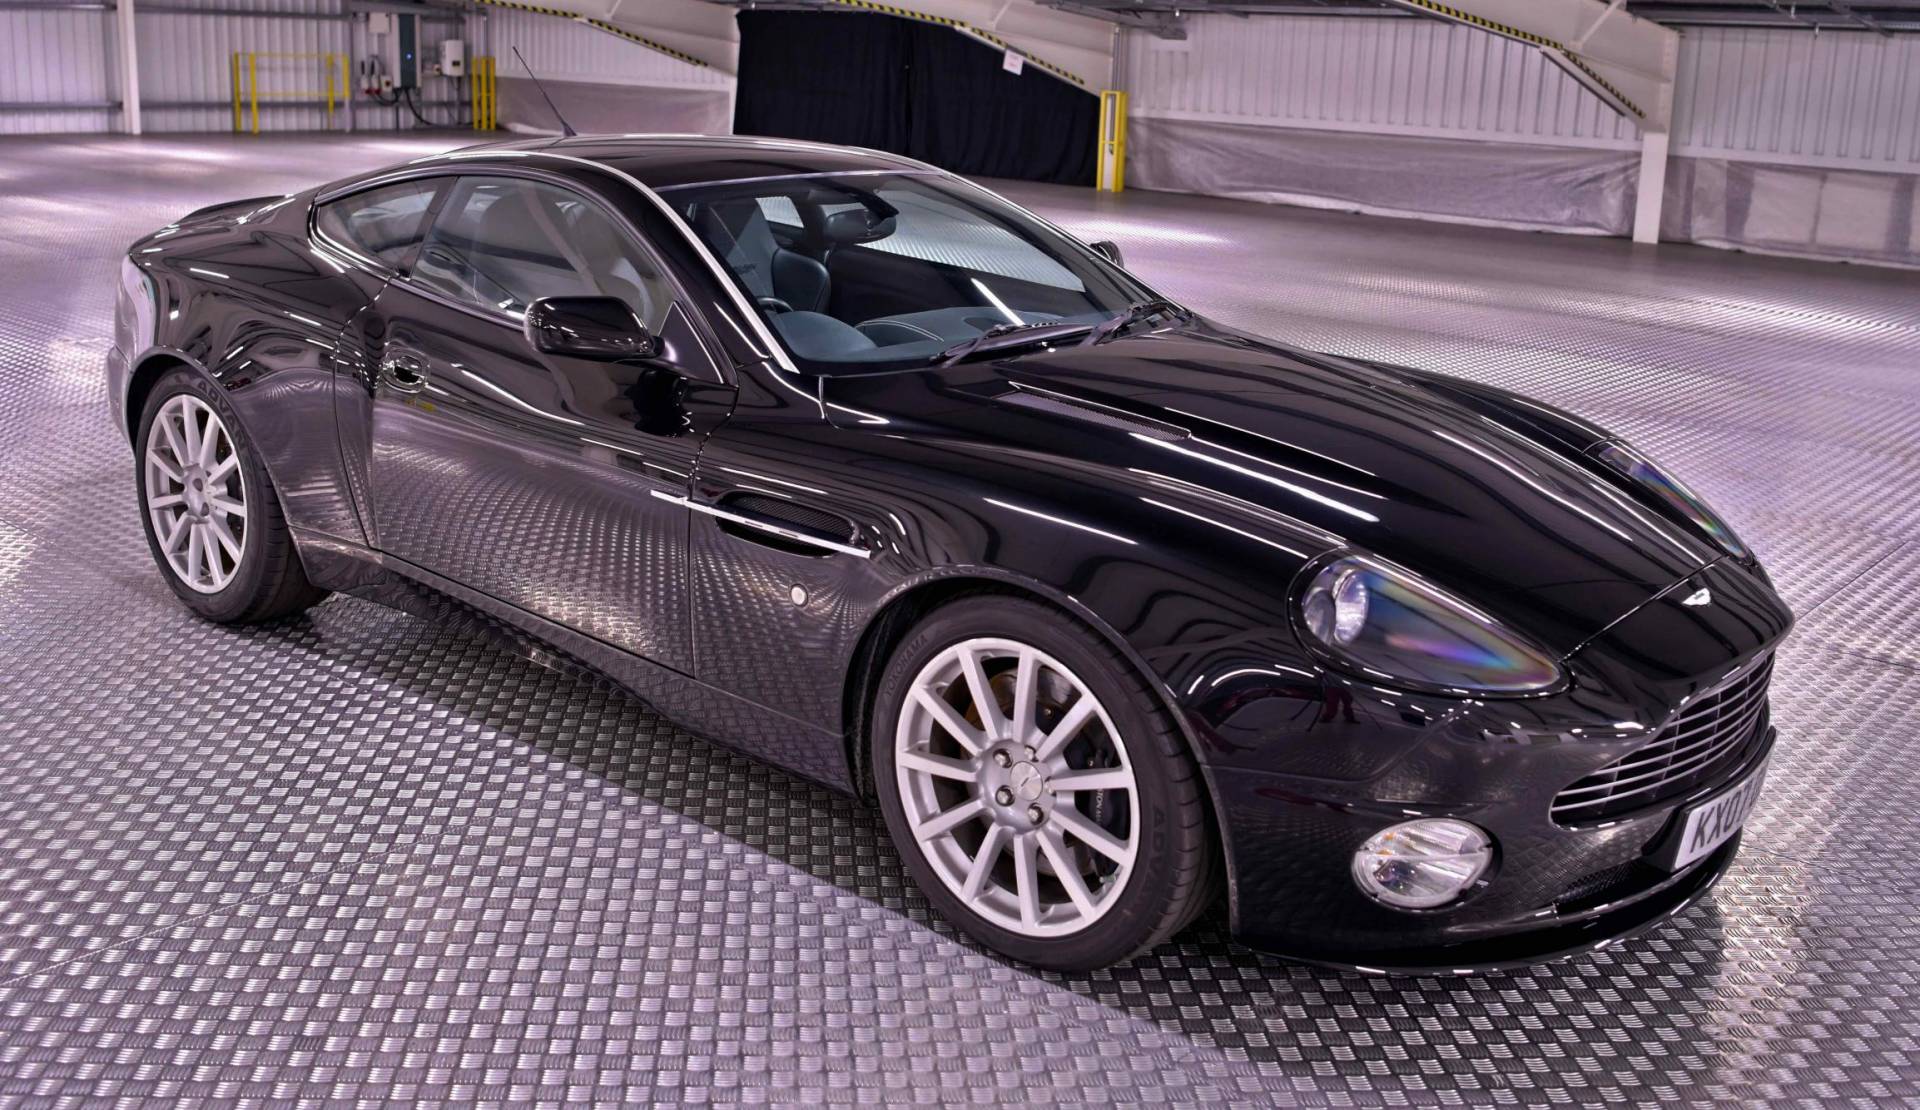 For Sale: Aston Martin V12 Vanquish S Ultimate Edition (2007) offered for  £415,307